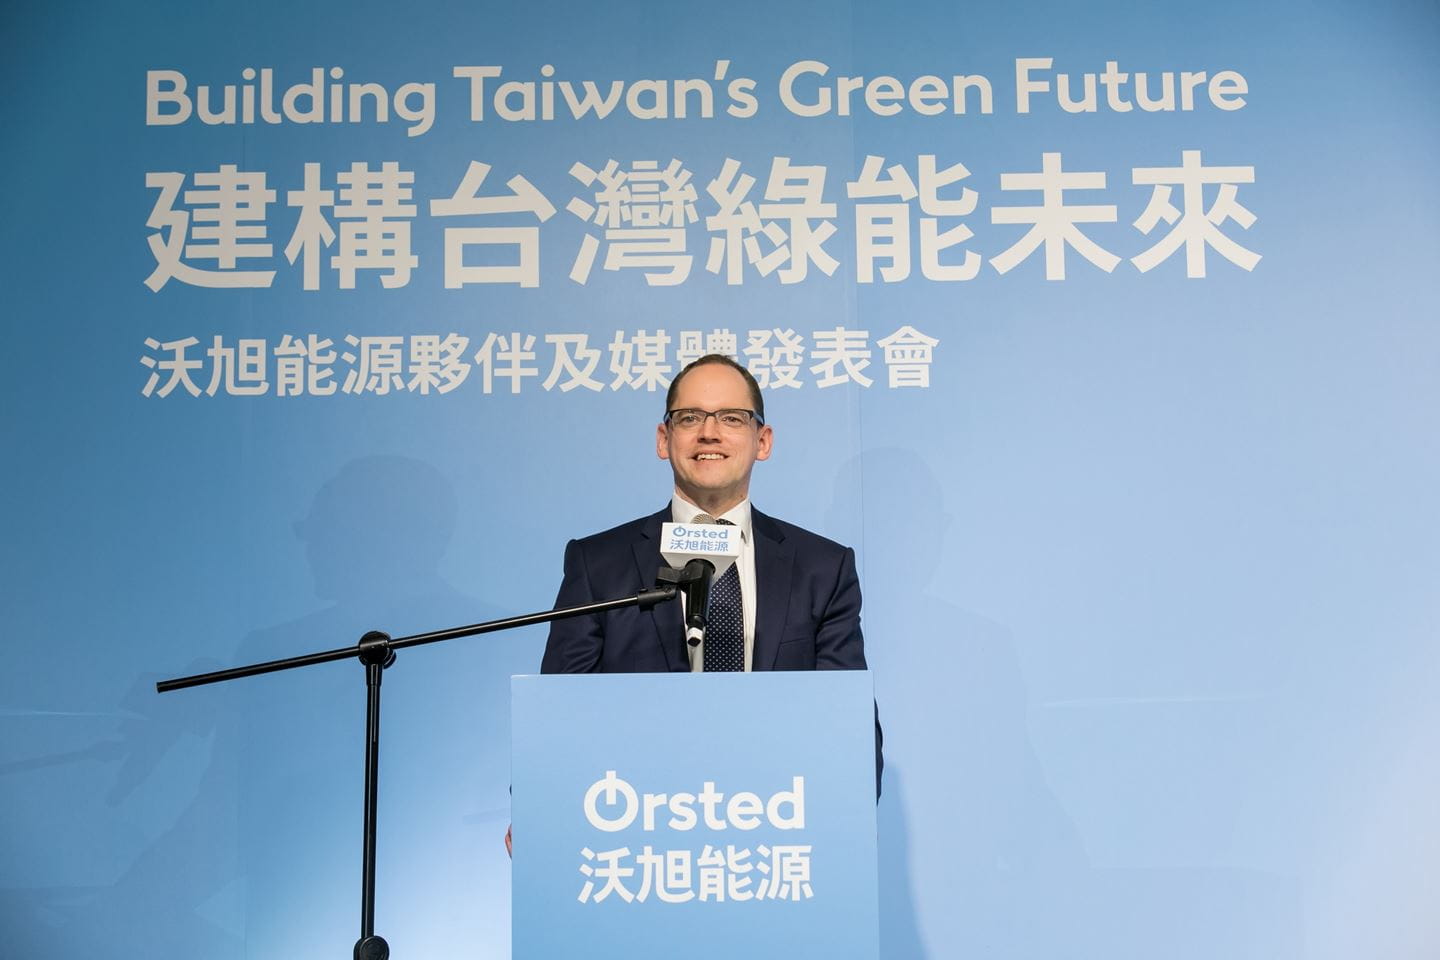 steds energy storage project in Changhua also rsteds first storage in Asia will collaborate